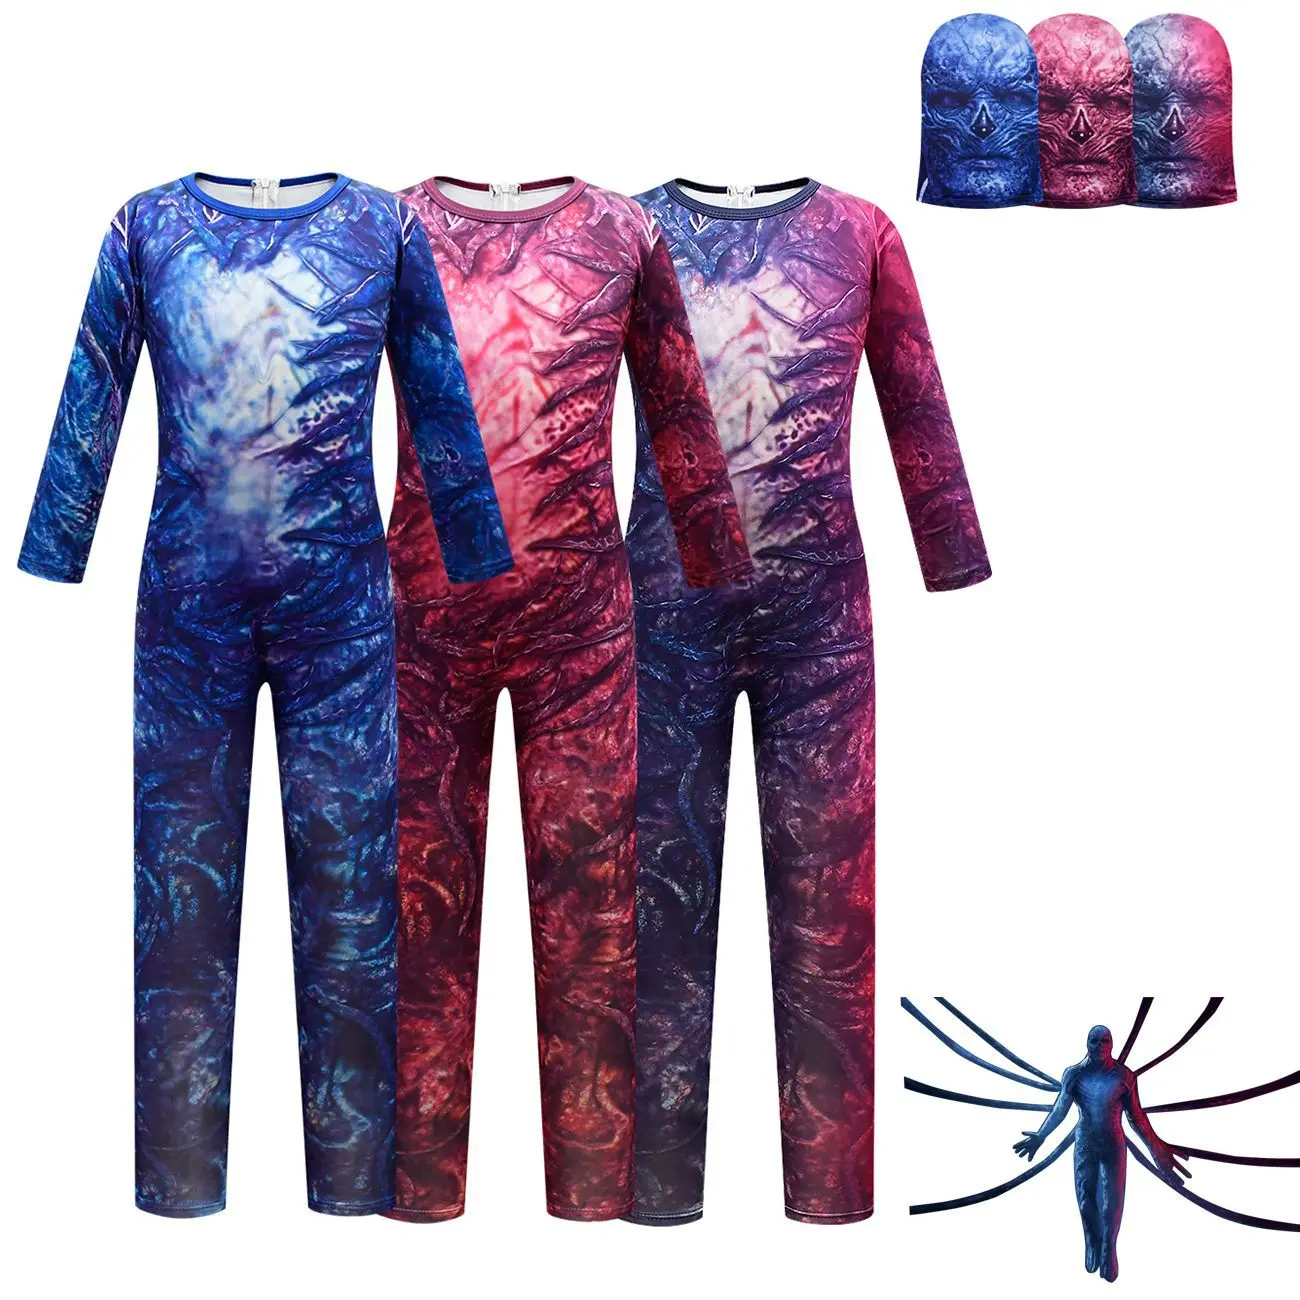 

Stranger Cos Things Season 4 Jumpsuit Mask Demogorgon Cosplay Costume for Kids Cosplay Costume Outfits Halloween Carnival Suit